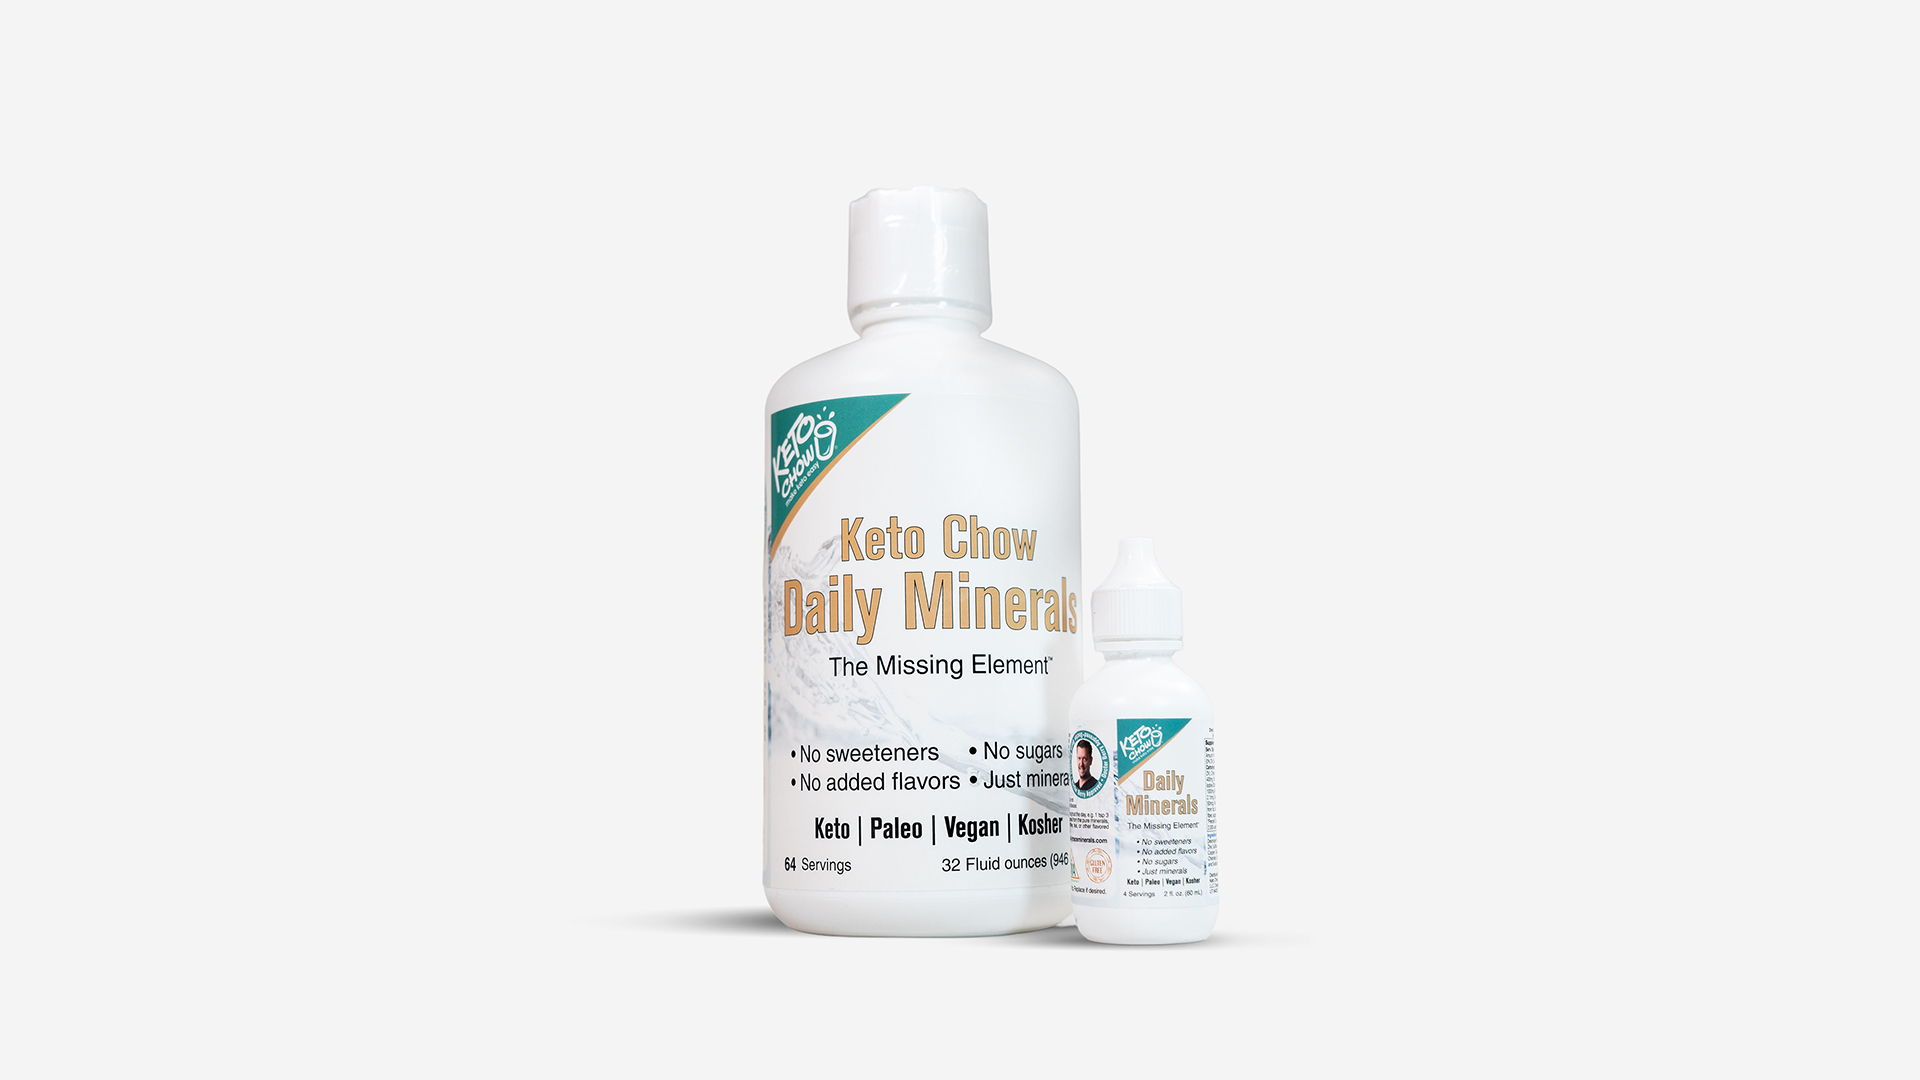 Keto Chow Daily Minerals